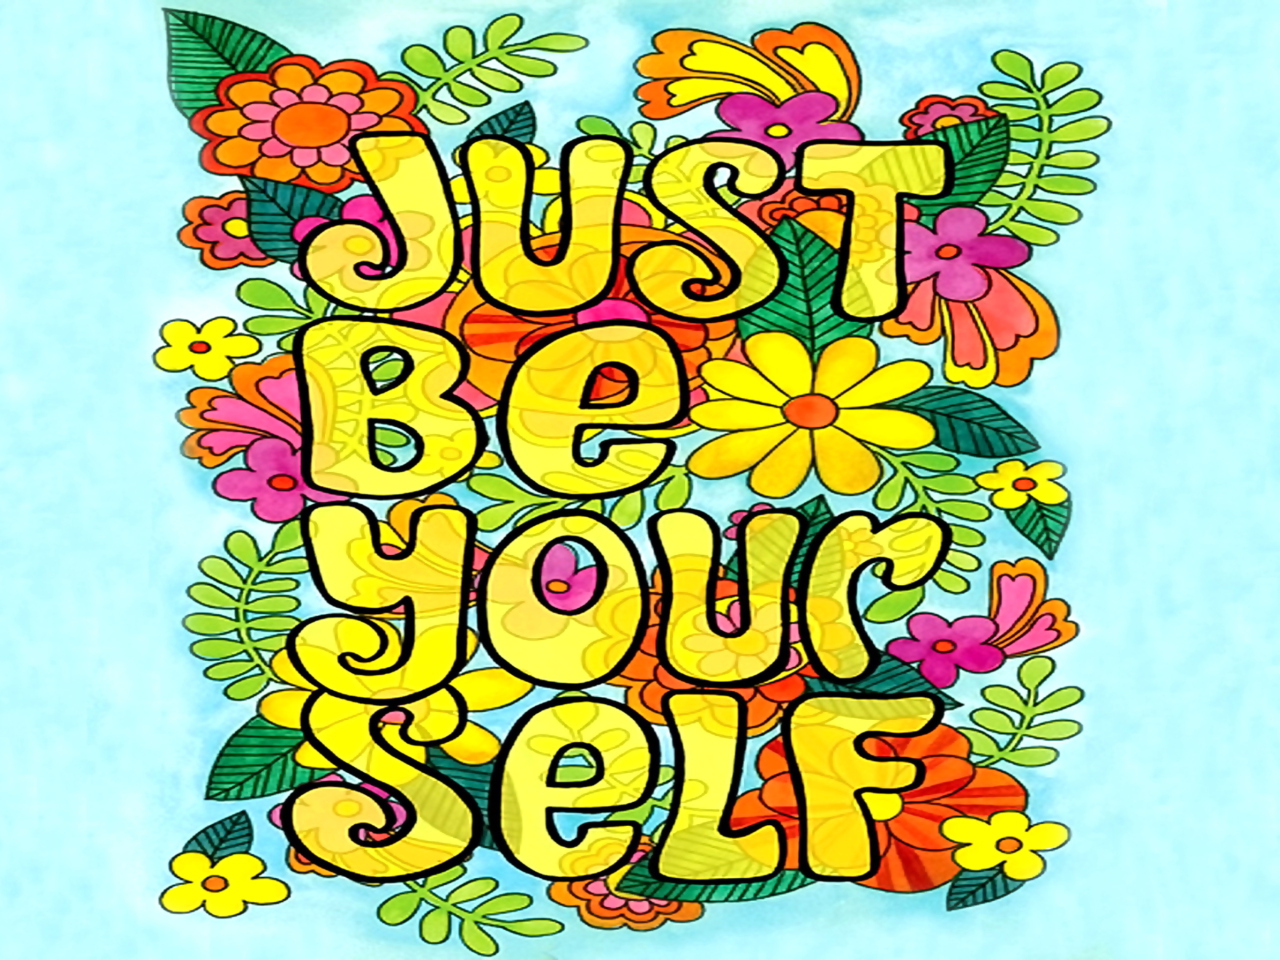 Just Be Yourself wallpaper 1280x960